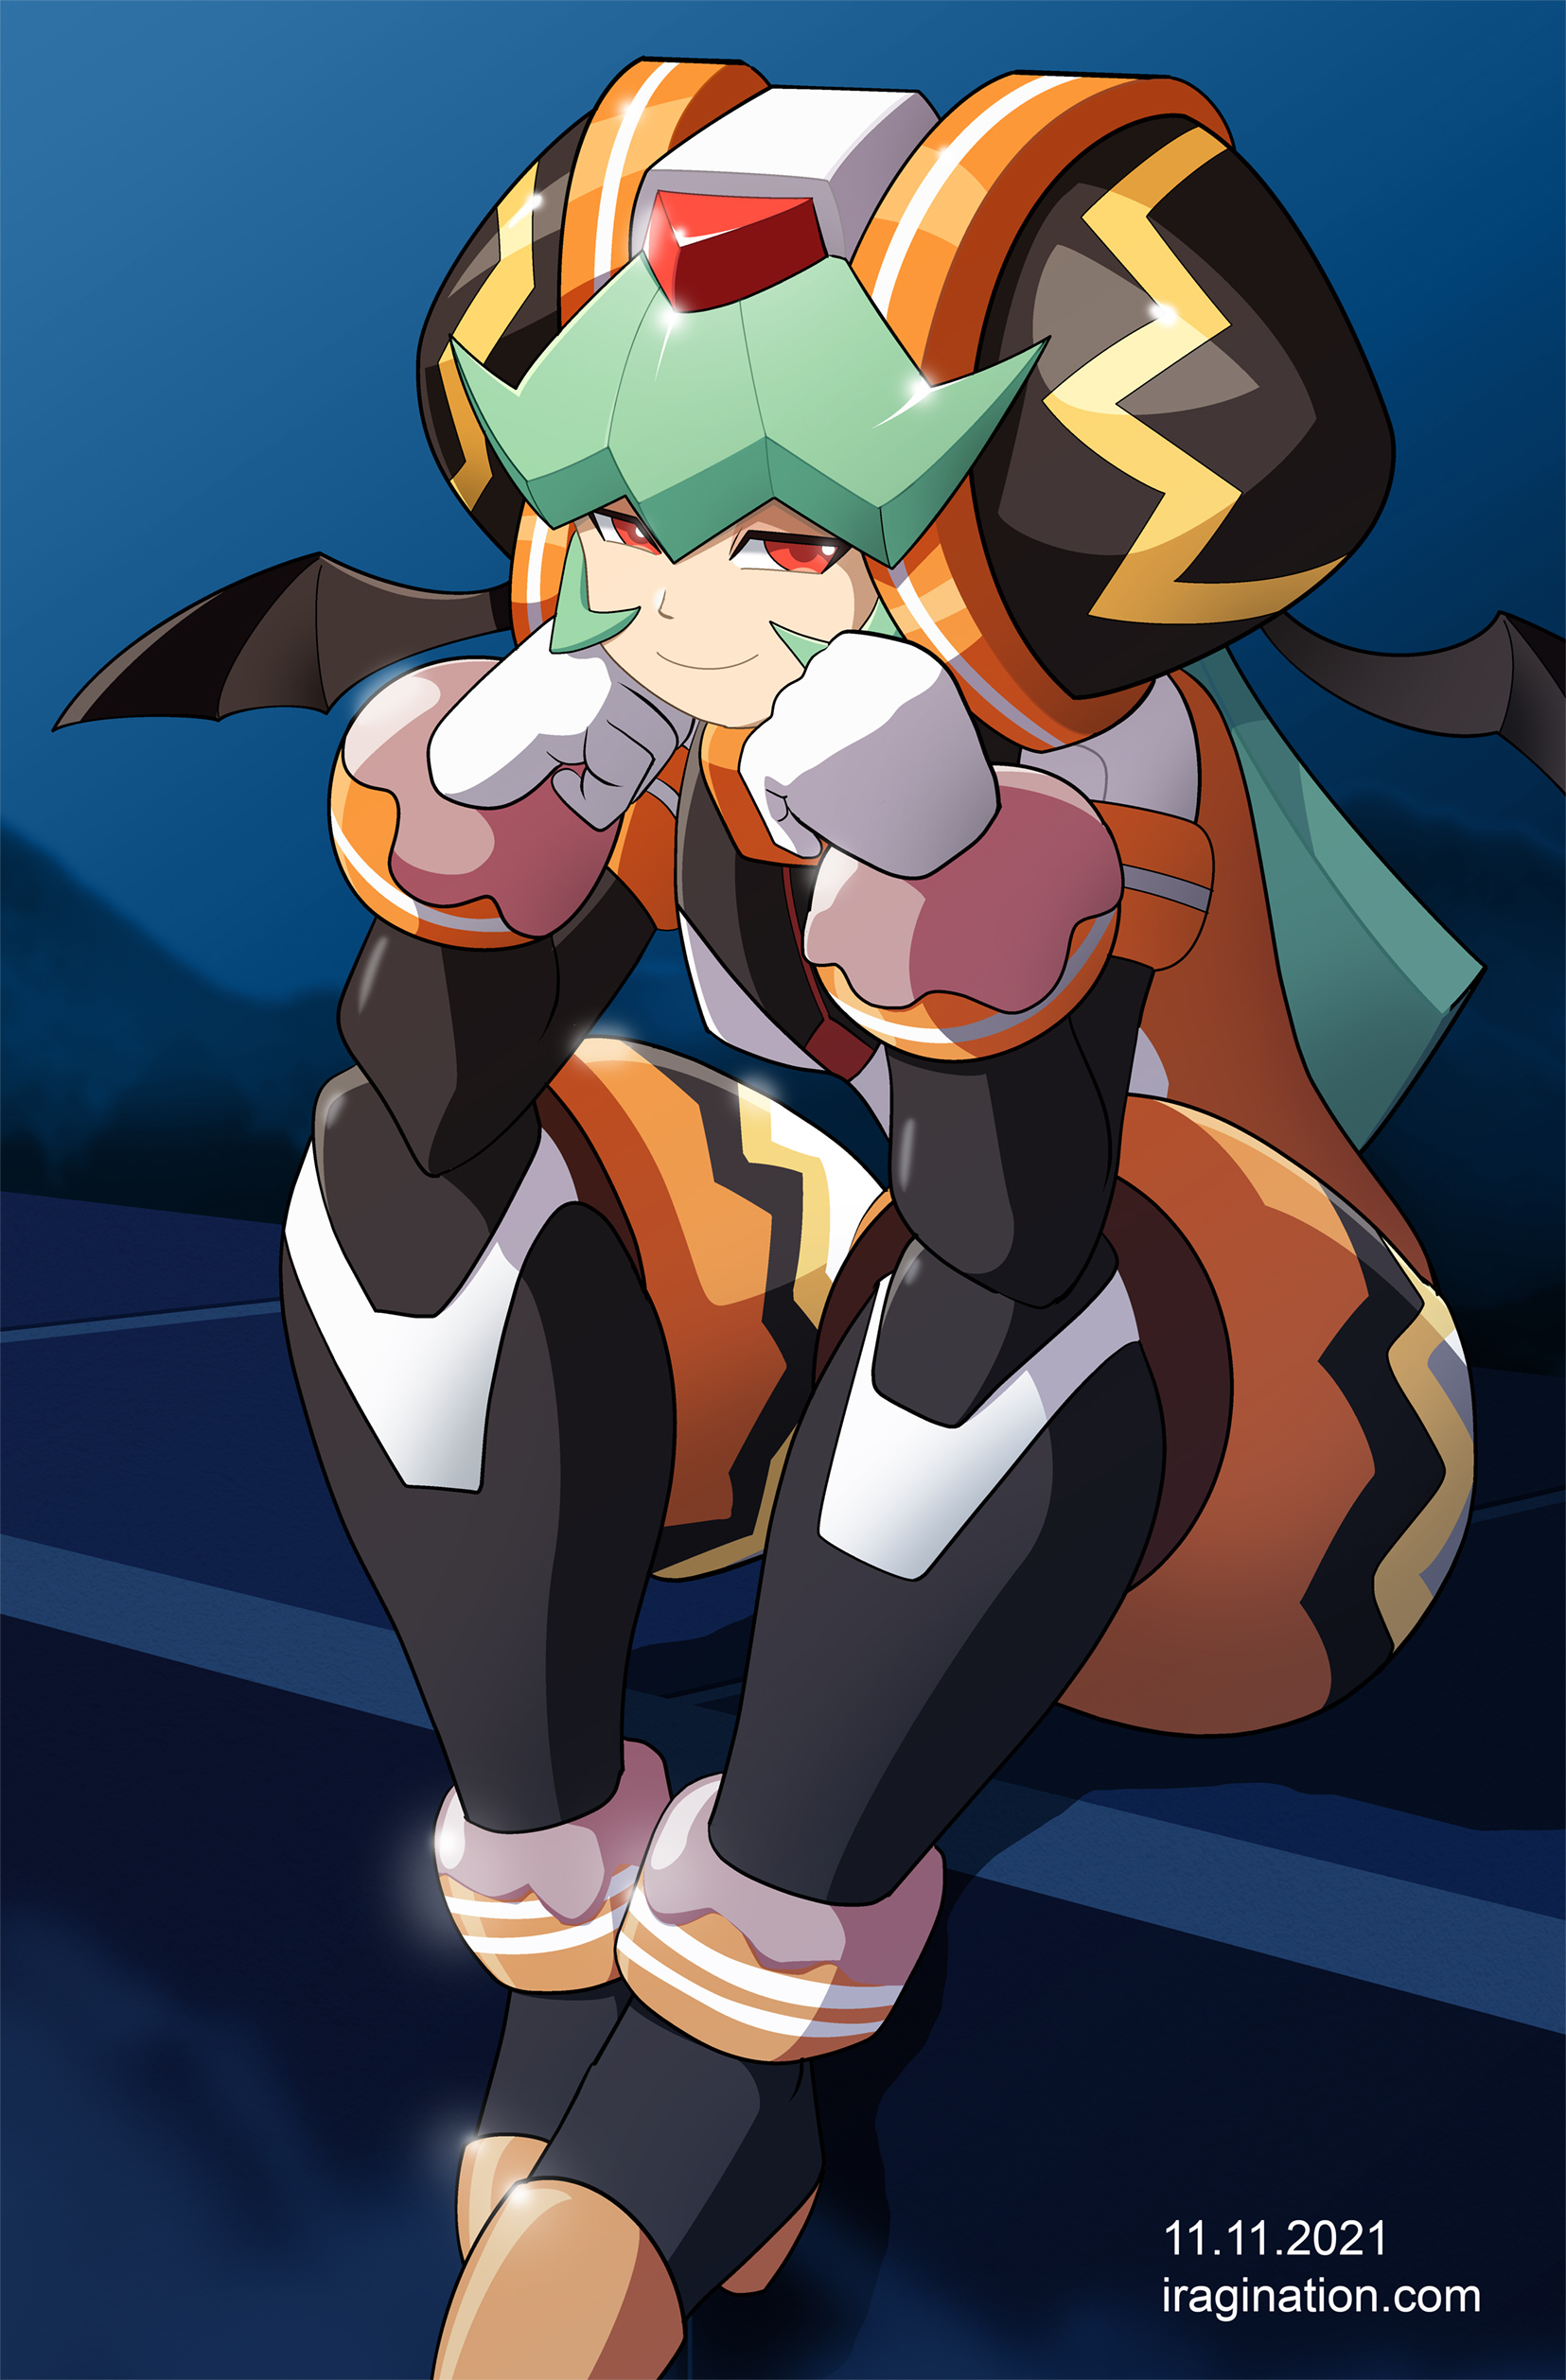 Halloween Pandora - Rockman X DiVE
Here's [url=https://www.facebook.com/CAPCOM.RXD/posts/848017009227723]Halloween Pandora[/url] from the 2021 Rockman X DiVE Halloween Event.

I don't think I have drawn Pandora before. I shied away because these helmets are rather difficult to get right. Kind of the same problem when trying to draw [url=https://www.iragination.com/illust/displayimage.php?pid=318]Isoc's[/url] helmet. 

And apparently having her smile is kind of a big deal (not sure why; she giggles a lot in-game), so there you go. The initial sketch came up kind of nice, so I decided to color it.

[b]Blog post[/b]
Pandora is boss character from the Mega Man ZX/ZX Advent games, which released around 2006/2007. I did not have the opportunity to play those games at all. I consider them at the tail end of the steady Mega Man game releases of that era. 

They were released exclusively for the Nintendo DS consoles, so you had to invest in that platform if you wanted to play them. Learning that the series ended in an unresolved cliffhanger did not help me to decide to pick it up either. It is only recently thanks to the [url=https://www.megaman-zzxlc.com/]Mega Man Zero/ZX collection[/url] that I could take a look to these games. Now I just don't have time to play them, which I find hilarious. At least I caught up with the storyline.

Keywords: pandora